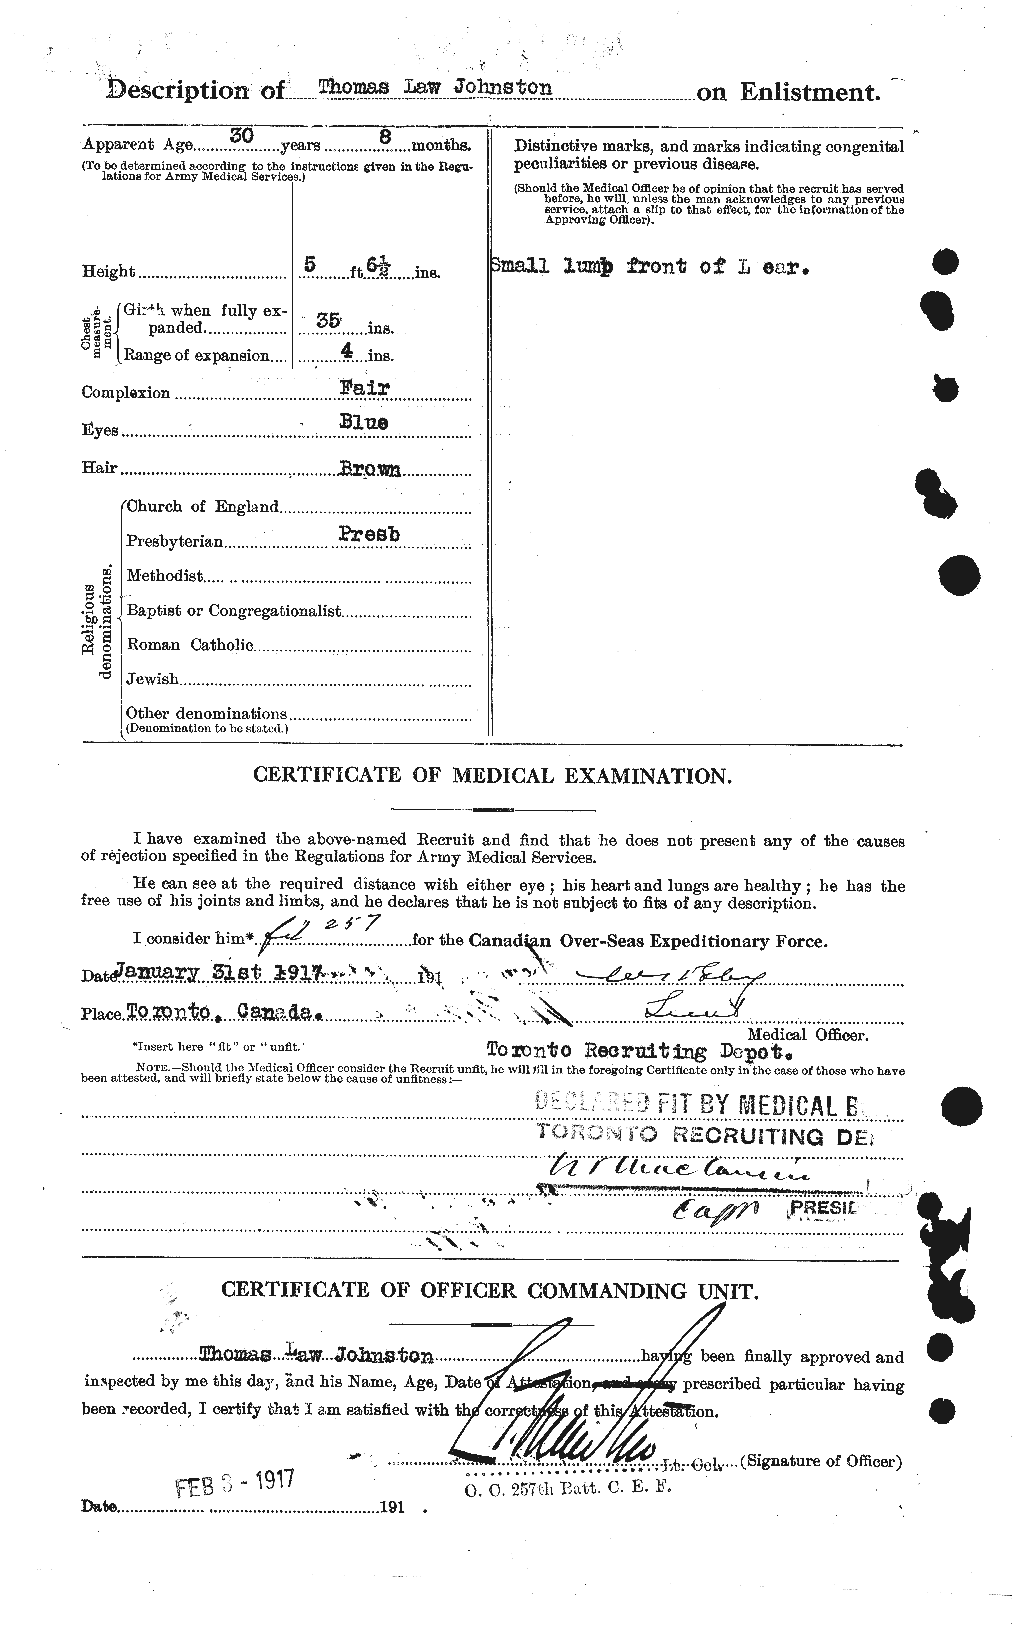 Personnel Records of the First World War - CEF 427172b